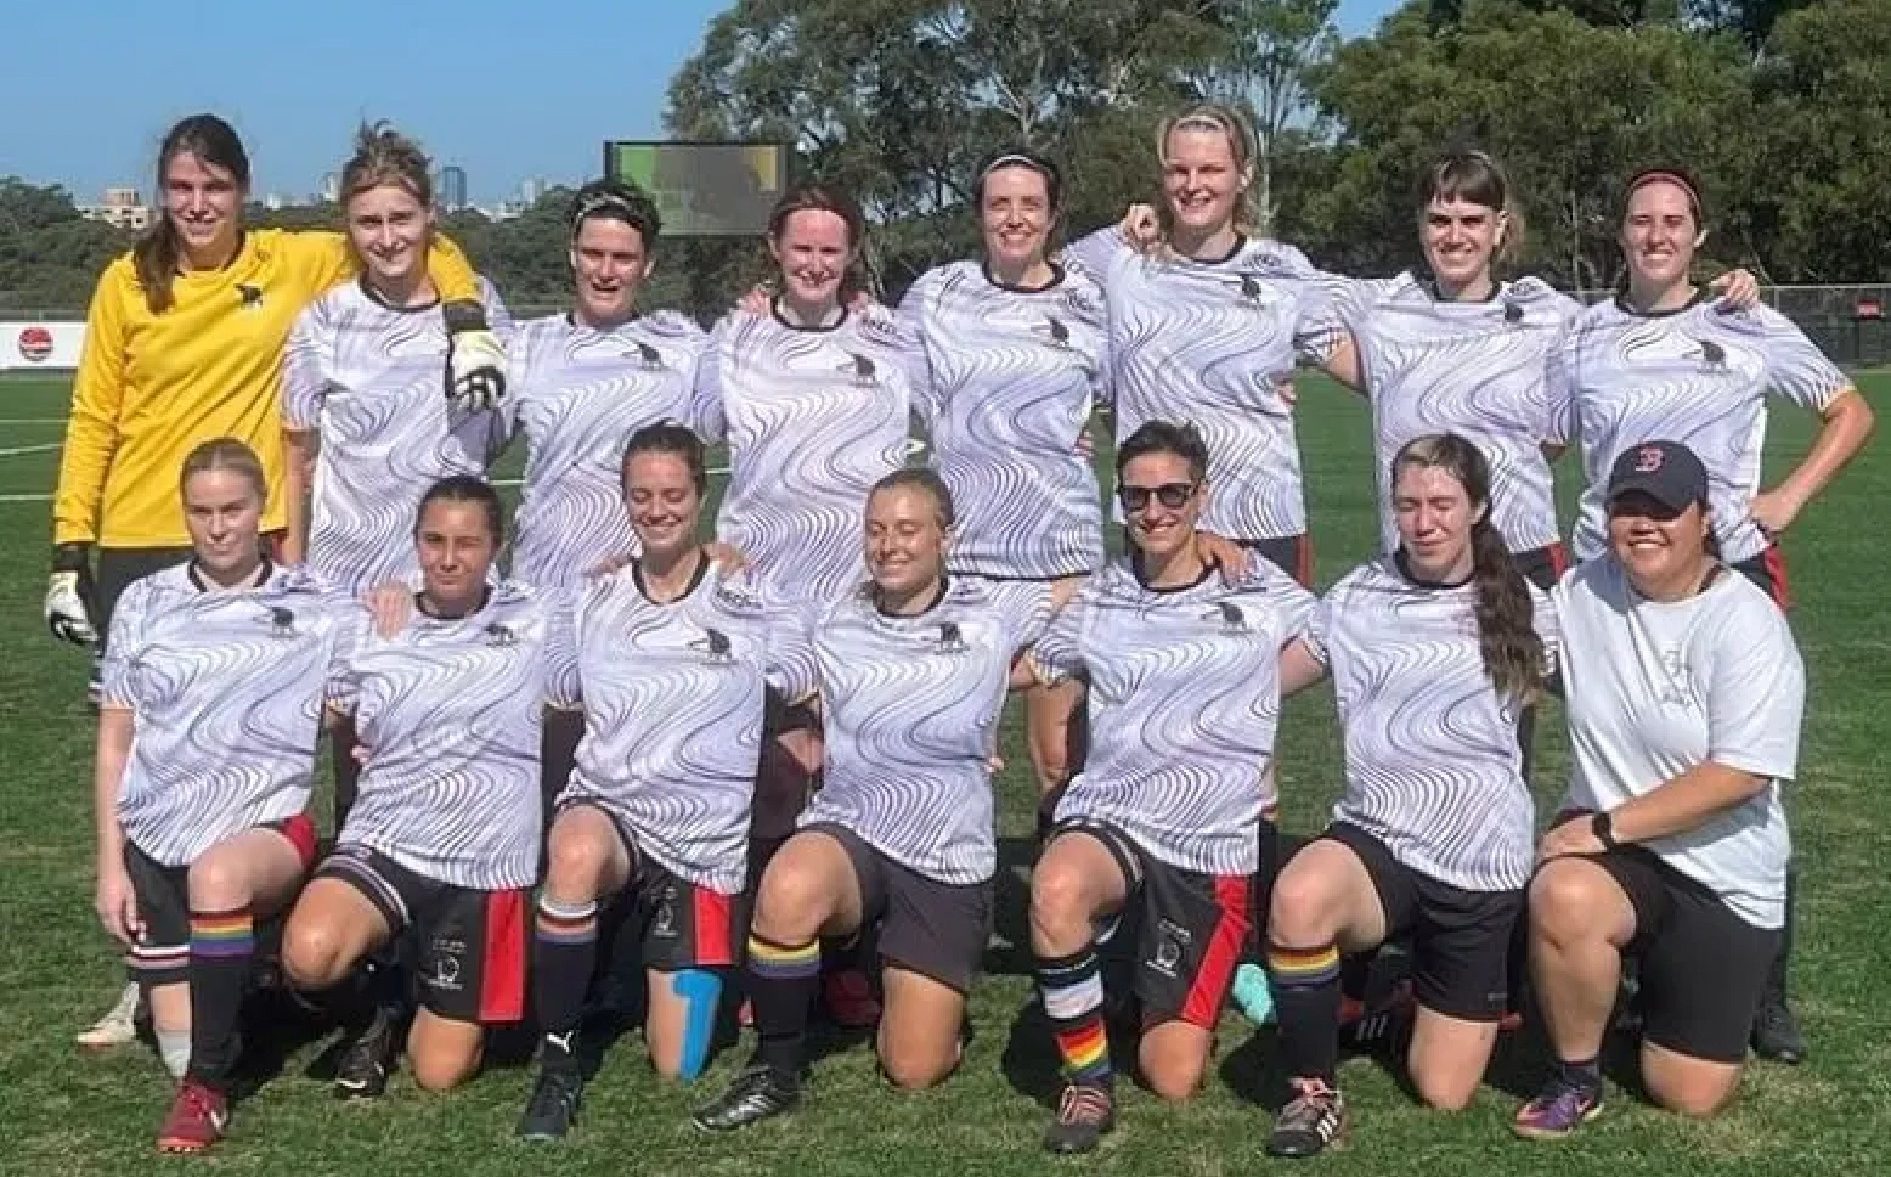 women’s team with five transgender players ‘broke opponent’s leg’ and has parents fearing for safety